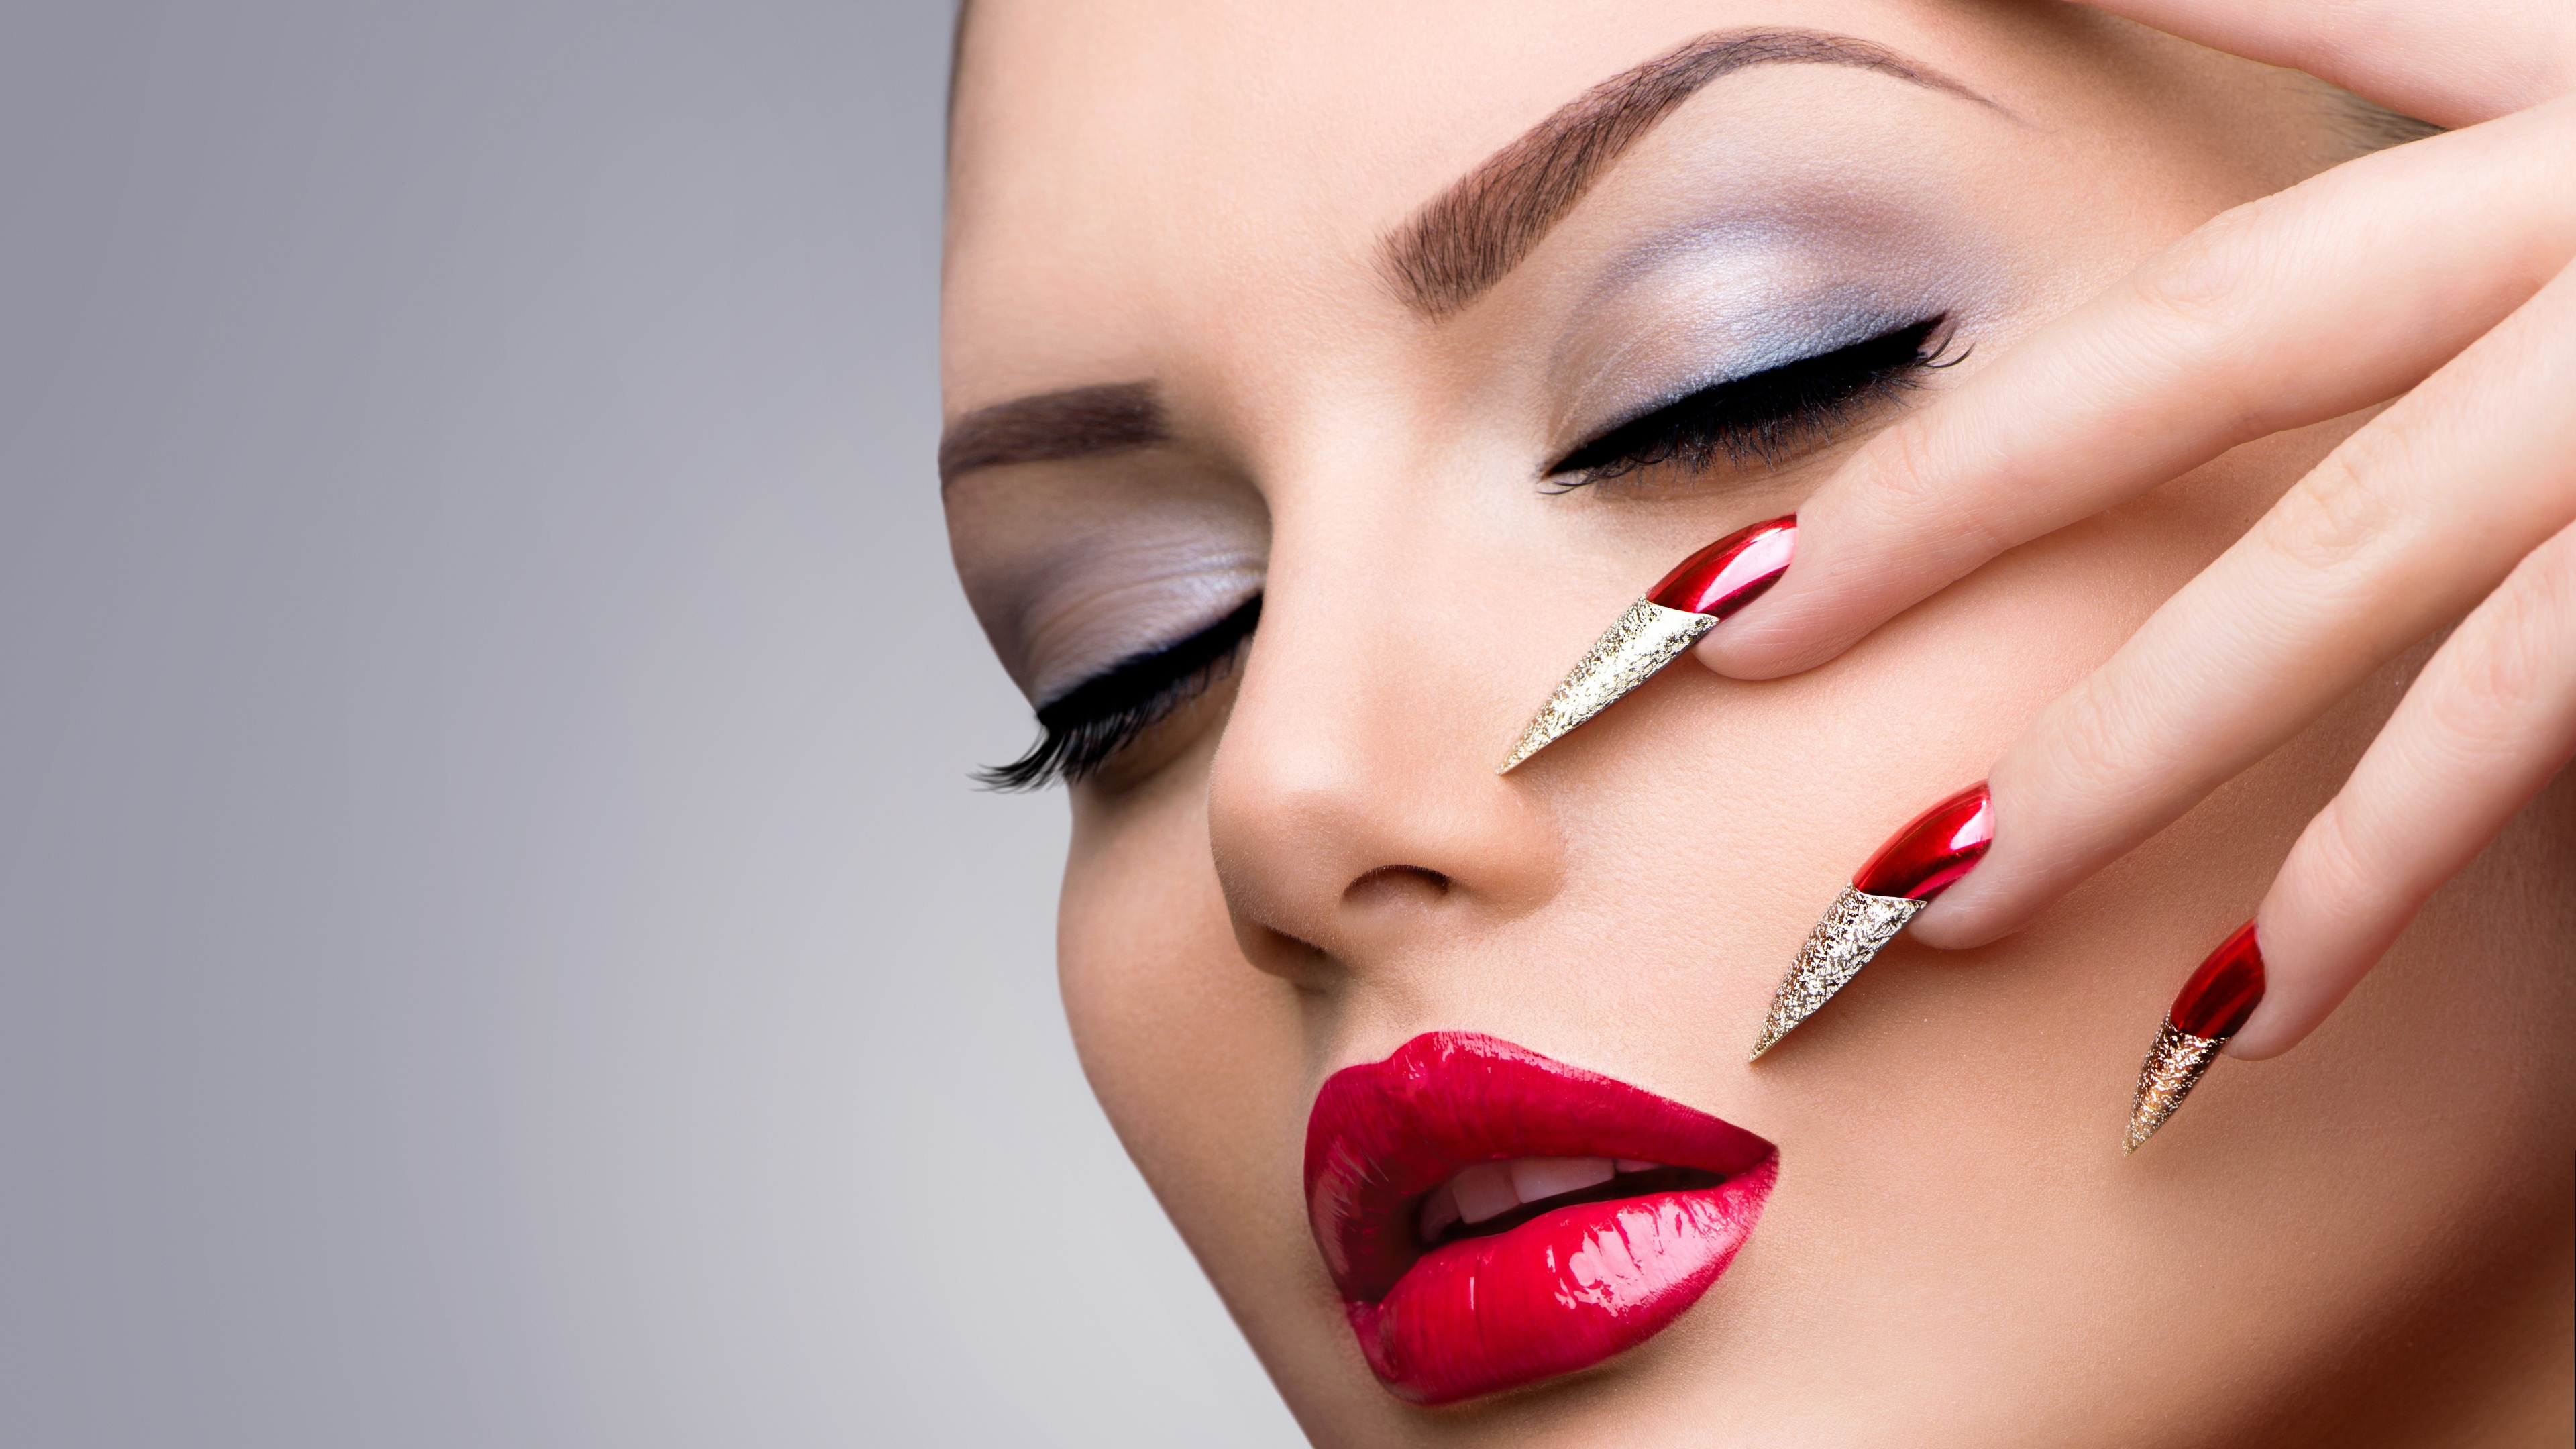 Model shows beautiful makeup and red manicure